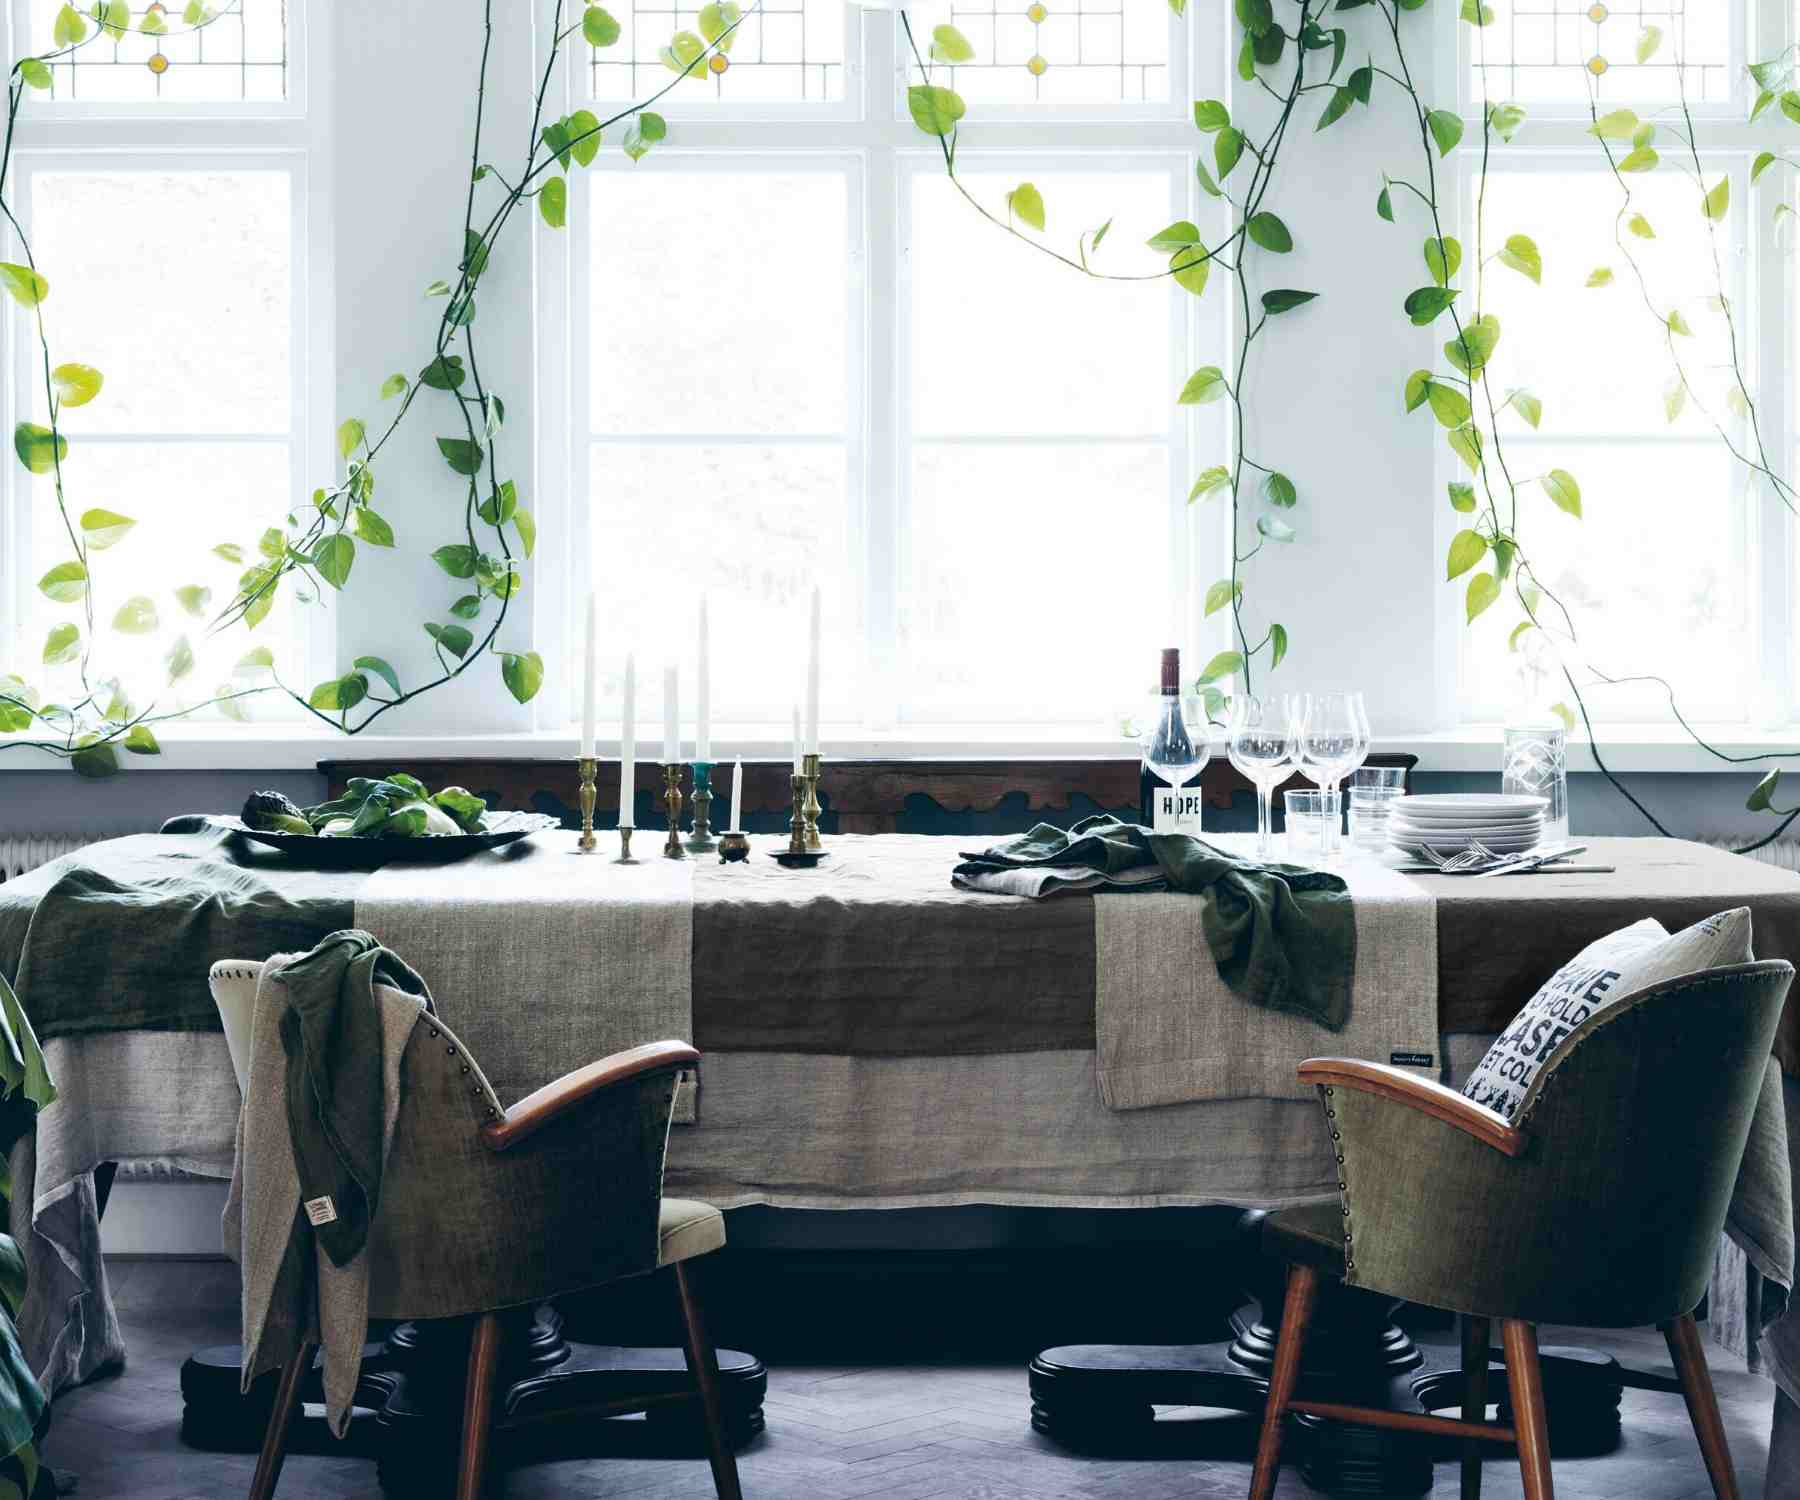 Large table with layered linen tablecloths in front of large window